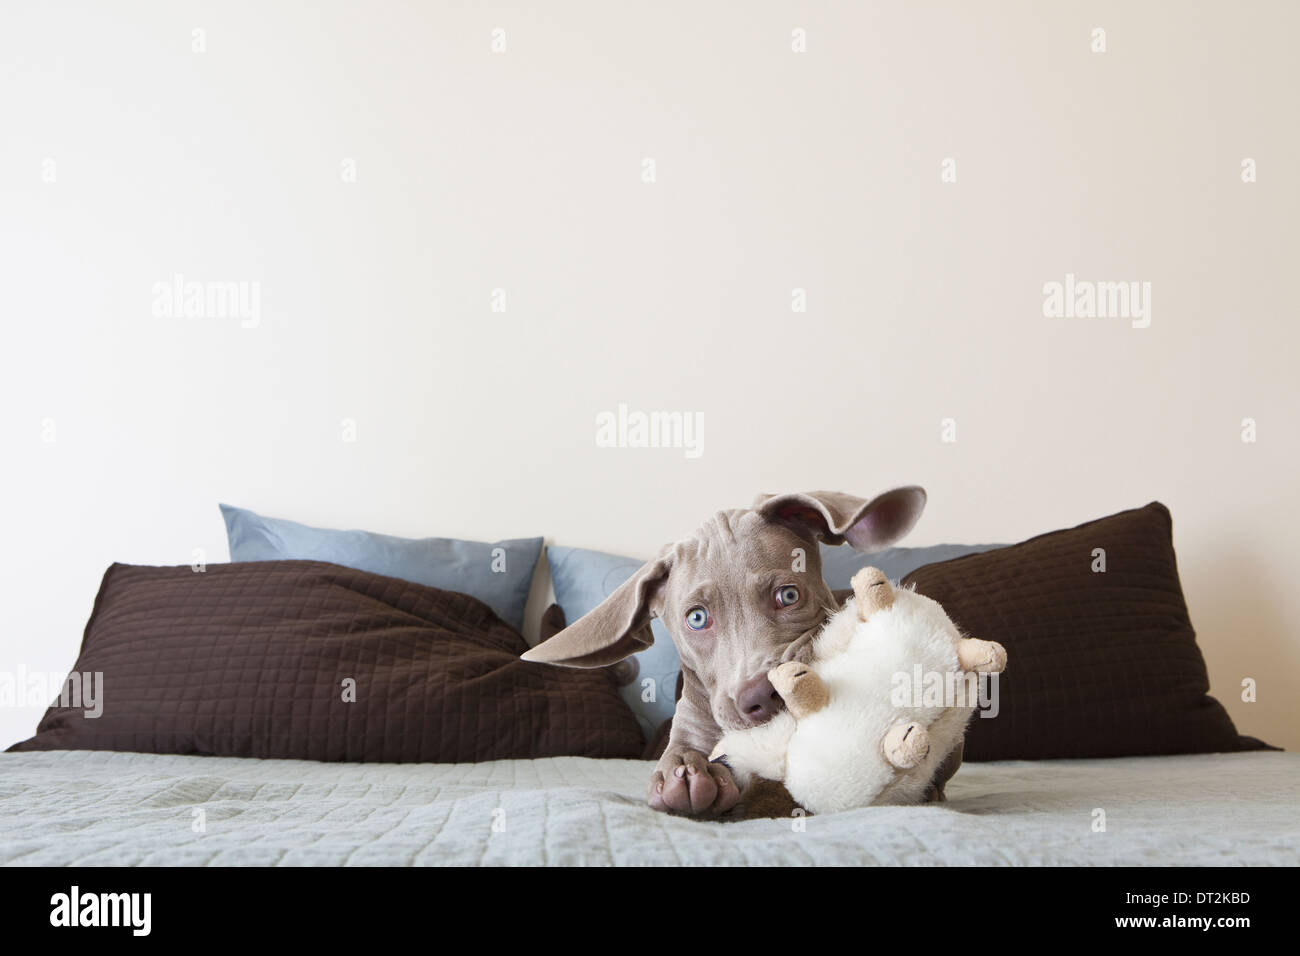 A Weimaraner puppy playing on a bed with stuffed toy in its mouth Stock Photo